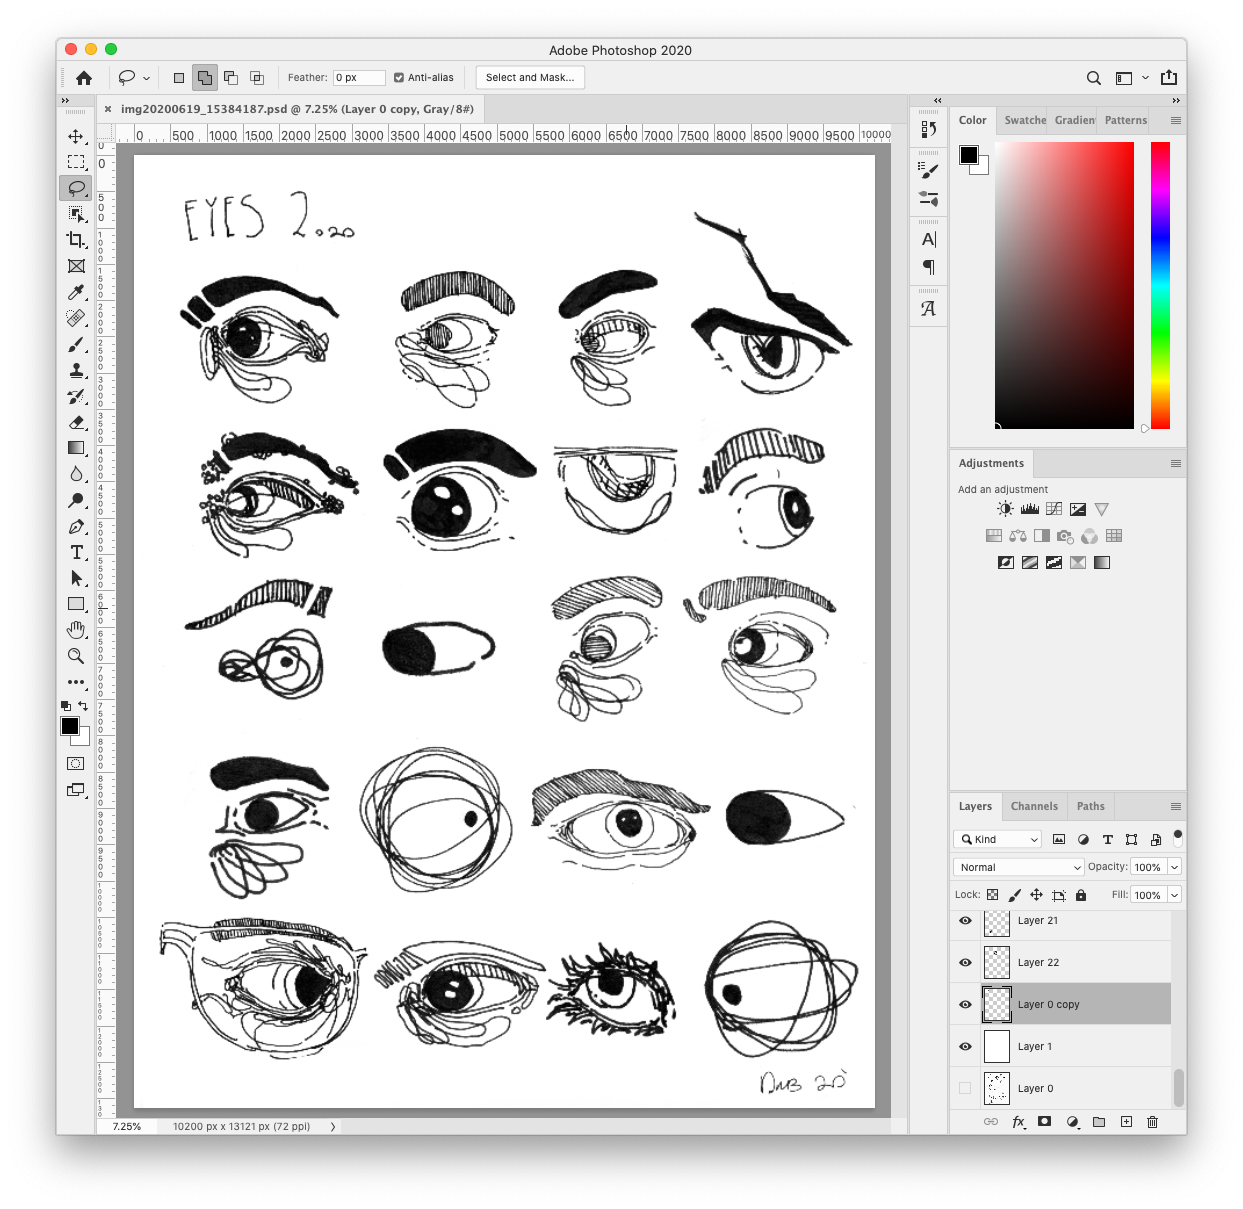 picture of photoshop UI and drawing I did of many eyes